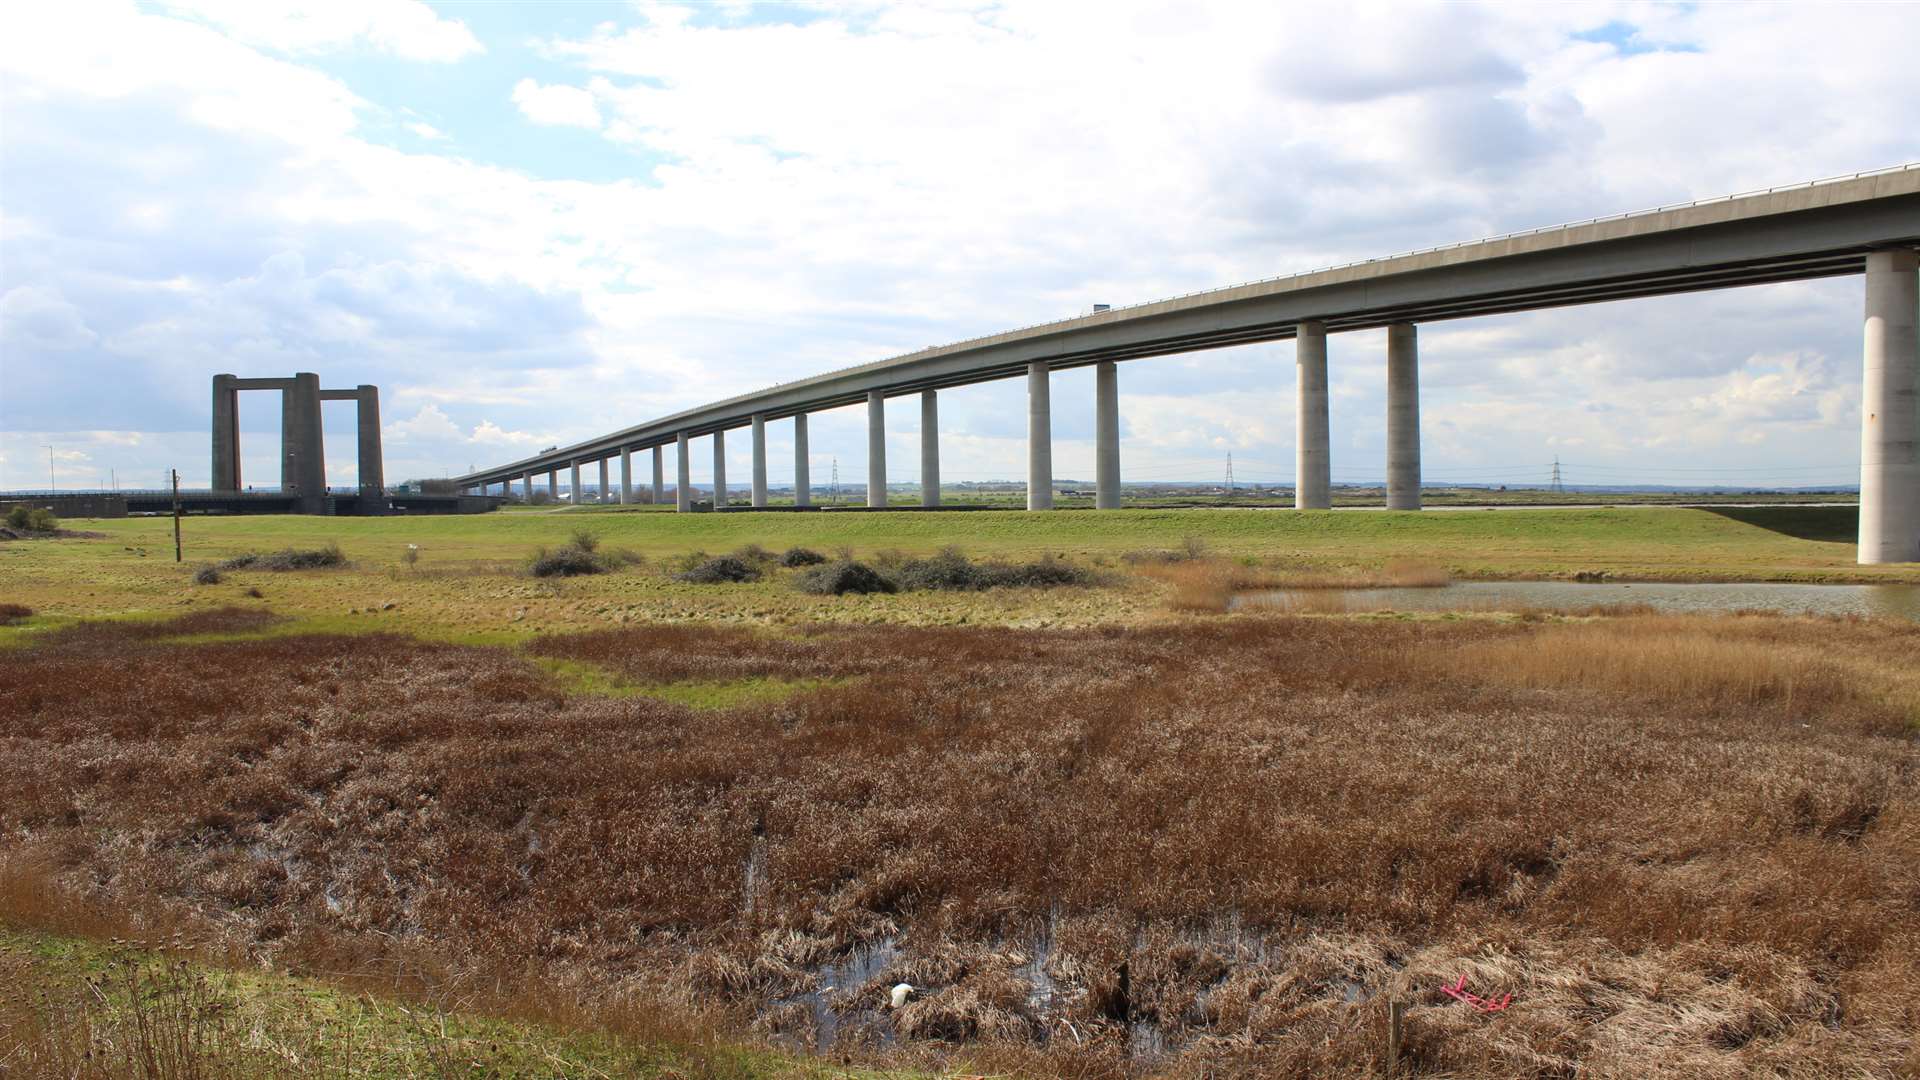 The Sheppey Crossing has a 70mph limit